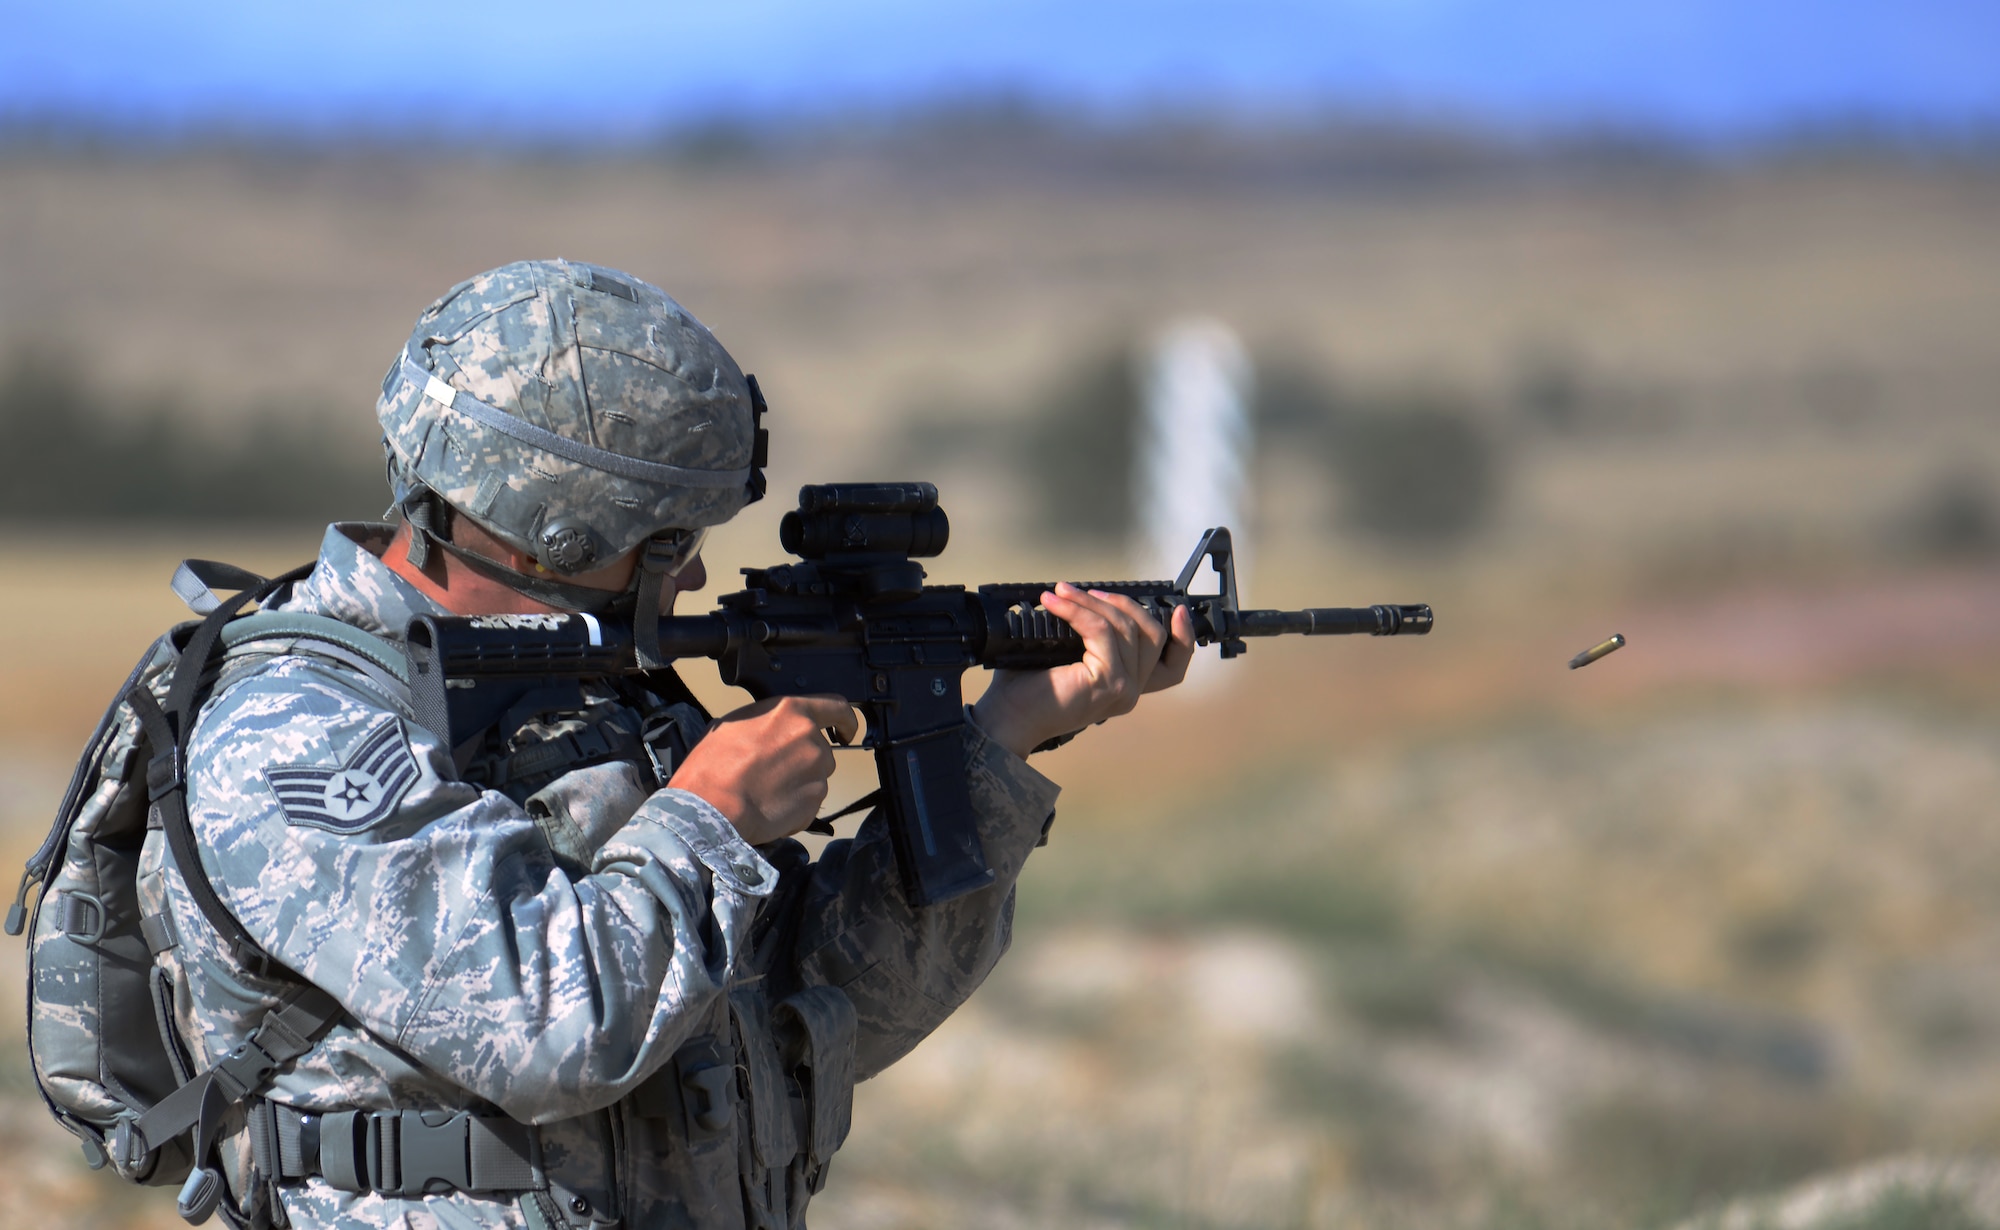 Staff Sgt. James Finley, 7th Bomb Wing, Dyess Air Force Base, Texas, fires at a target with a M-4 assault rifle Sept. 22, 2015, during the shooting range portion of the 2015 Global Strike Challenge security forces competition on Camp Guernsey, Wyo. The shooting competition required Airmen to use both precision and speed to complete a course where they showed proficiency in a number of different weapons. (U.S. Air Force photo by Senior Airman Brandon Valle)